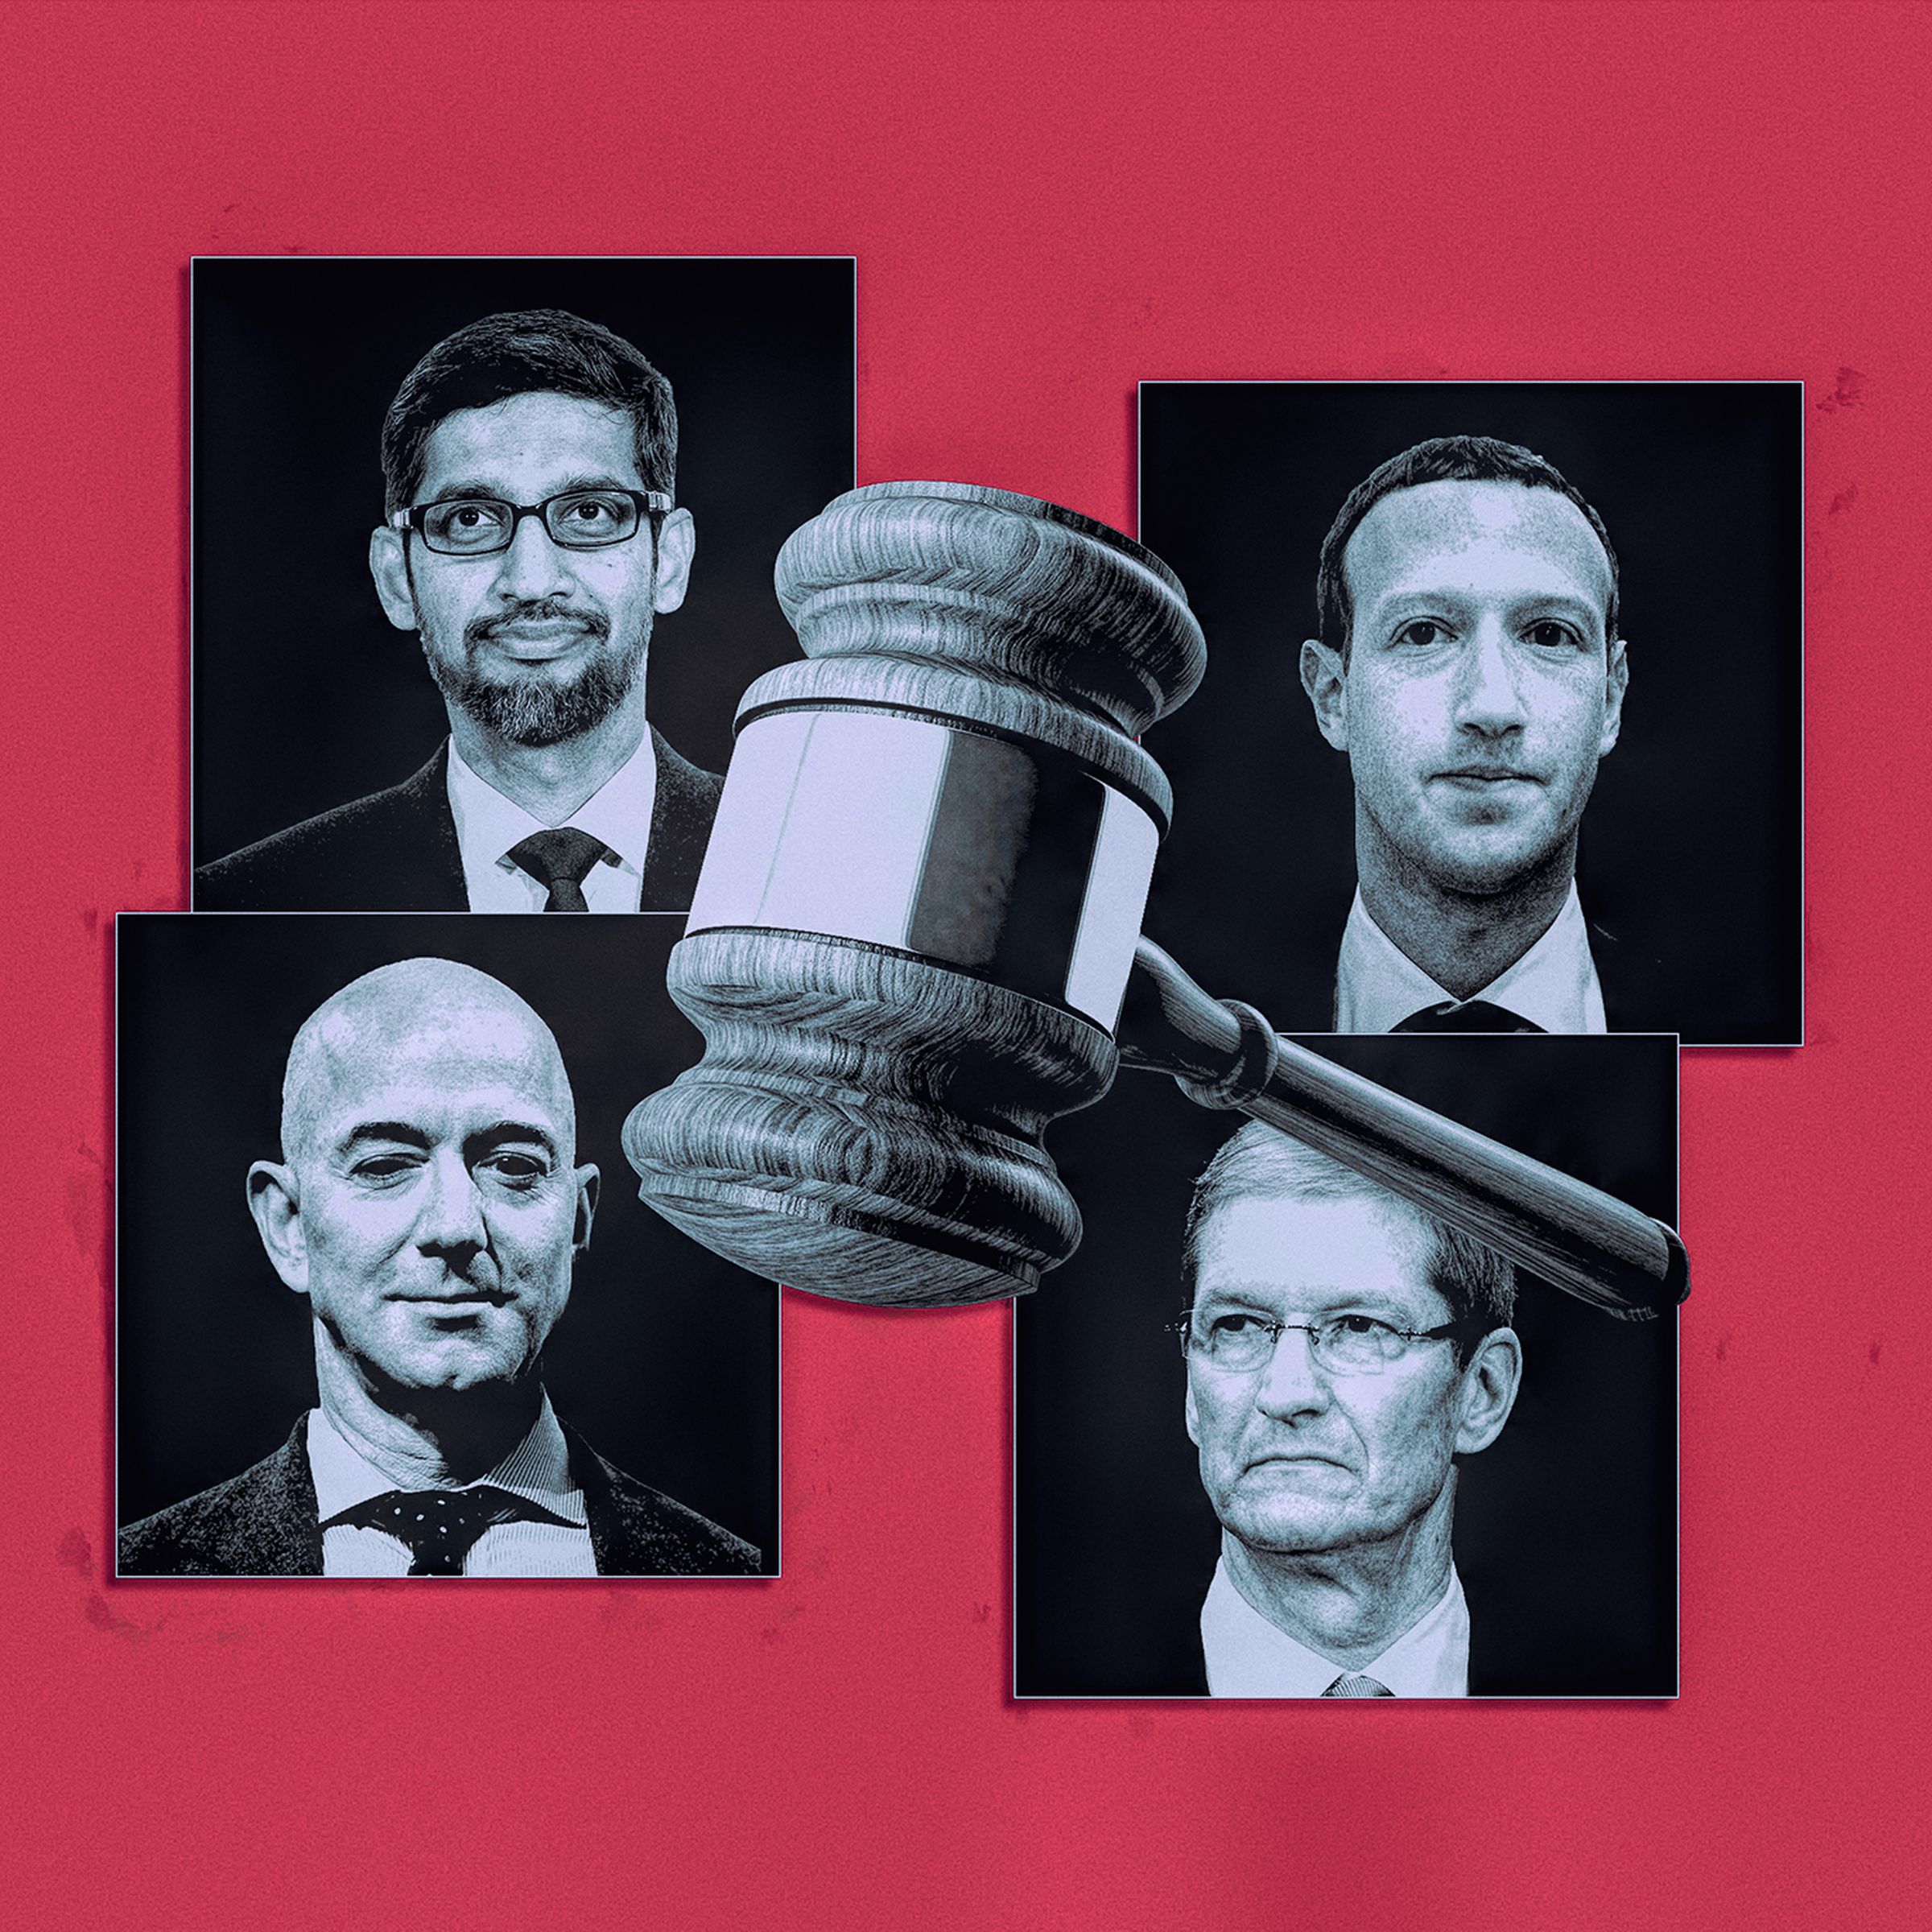 A photo illustration of a gavel center screen surrounded by black and white square cutouts of Sundar Pichai, Mark Zuckerberg, Jeff Bezos and Tim Cook over a red background.